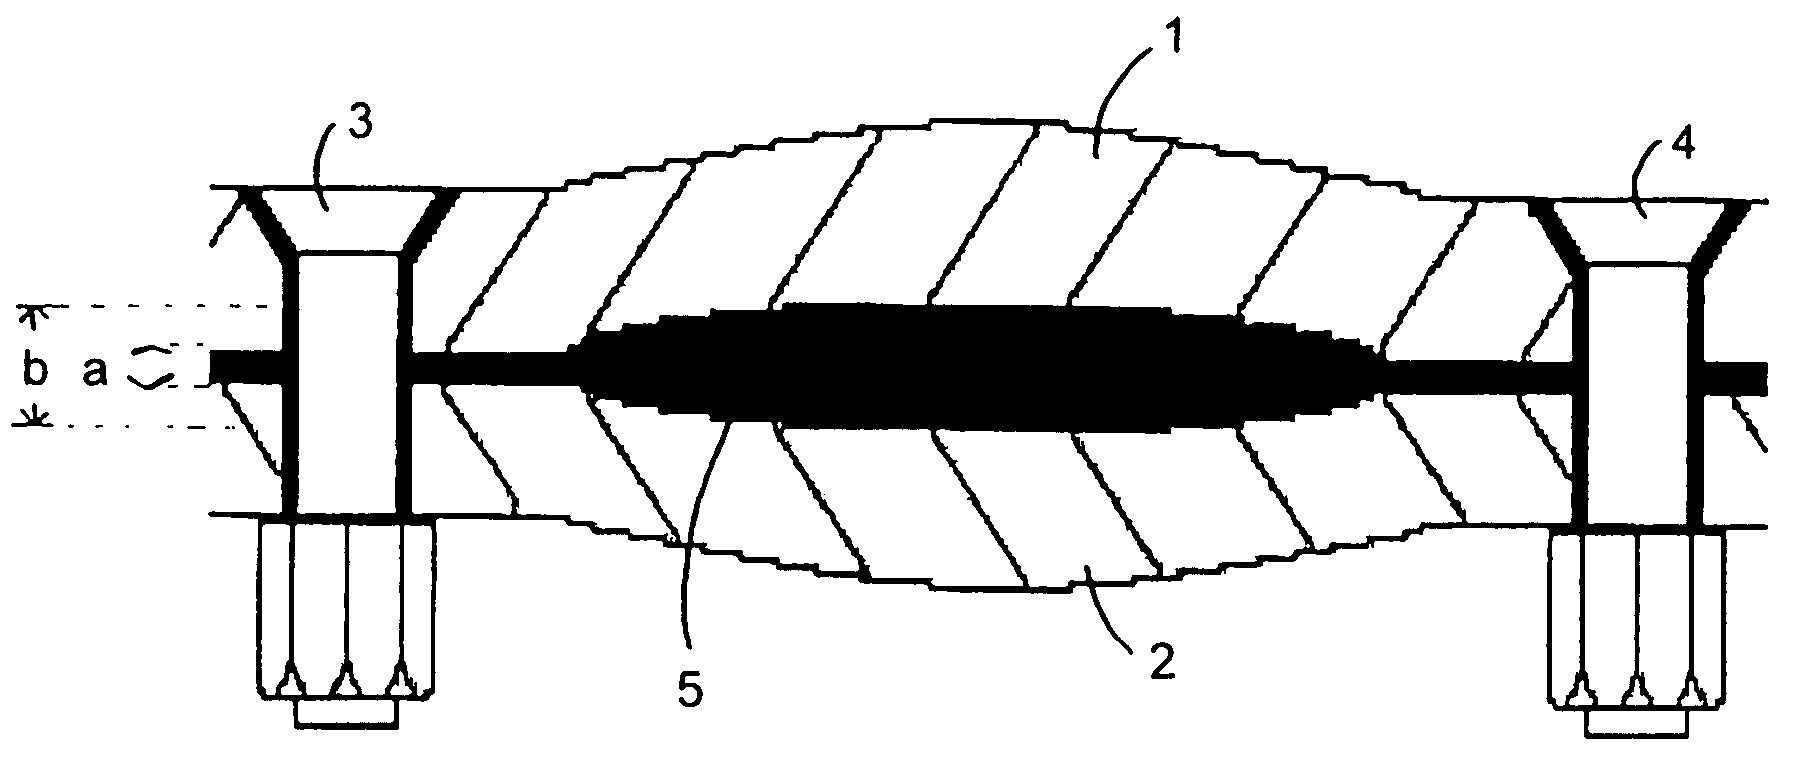 Method of sealing a joint